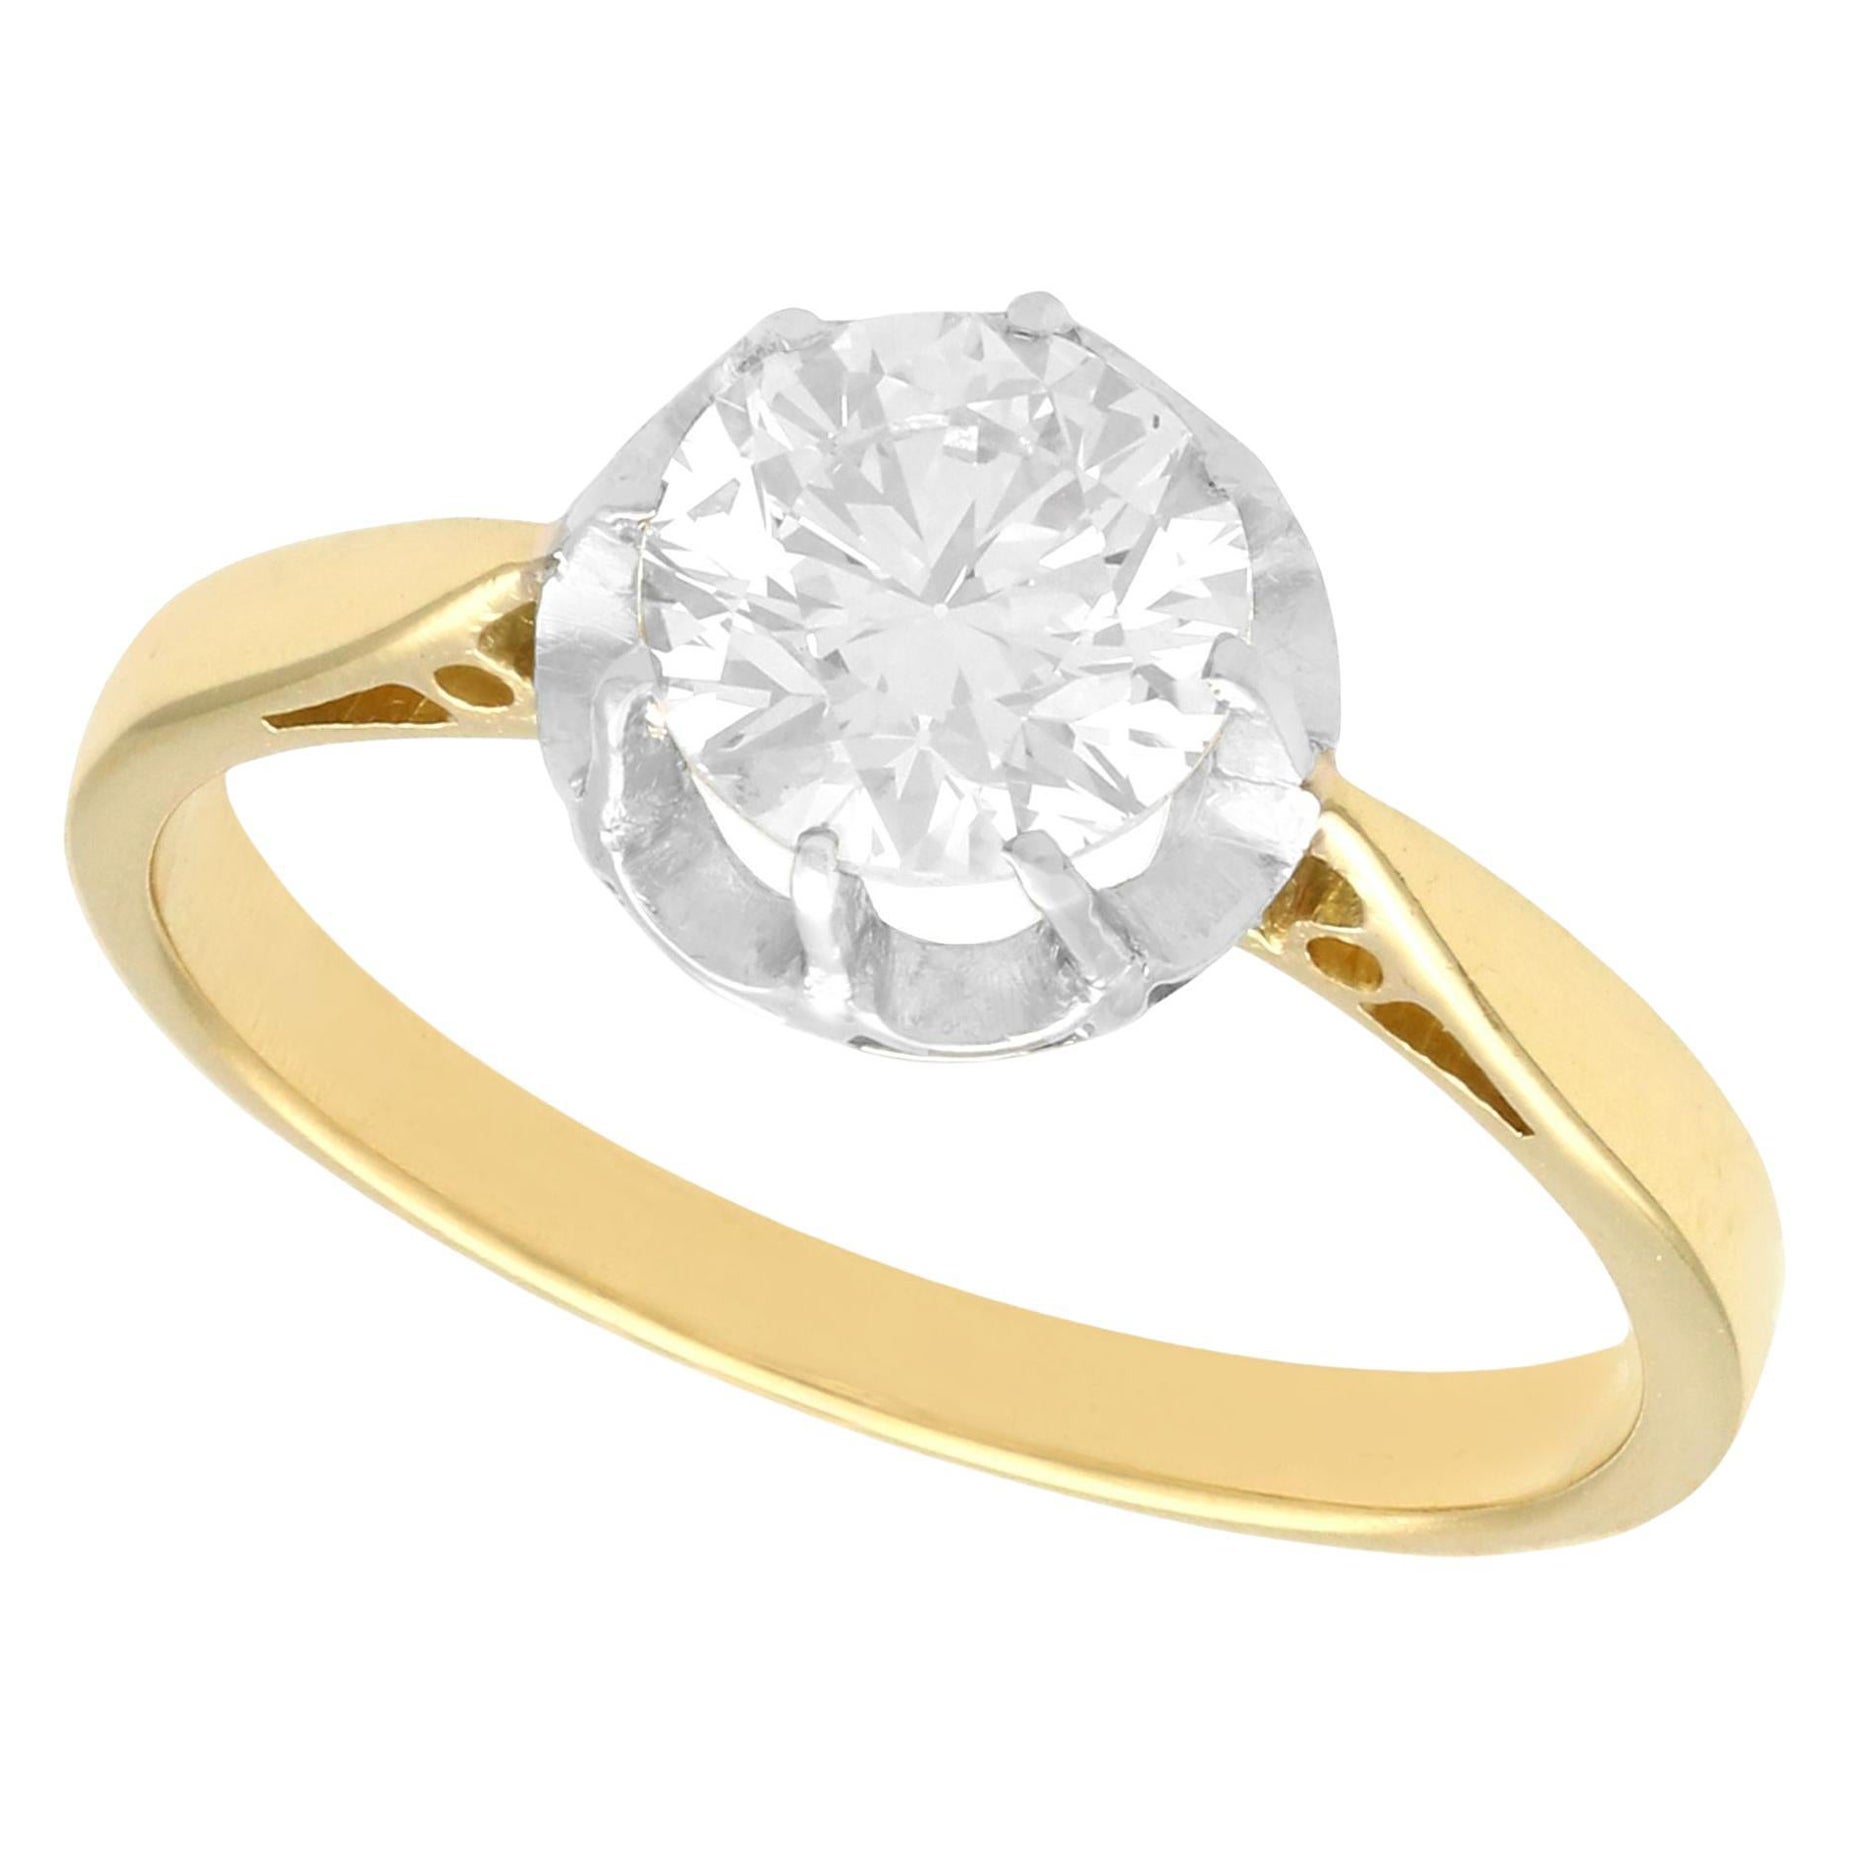 1920s 1.07 Carat Diamond and Yellow Gold Solitaire Engagement Ring